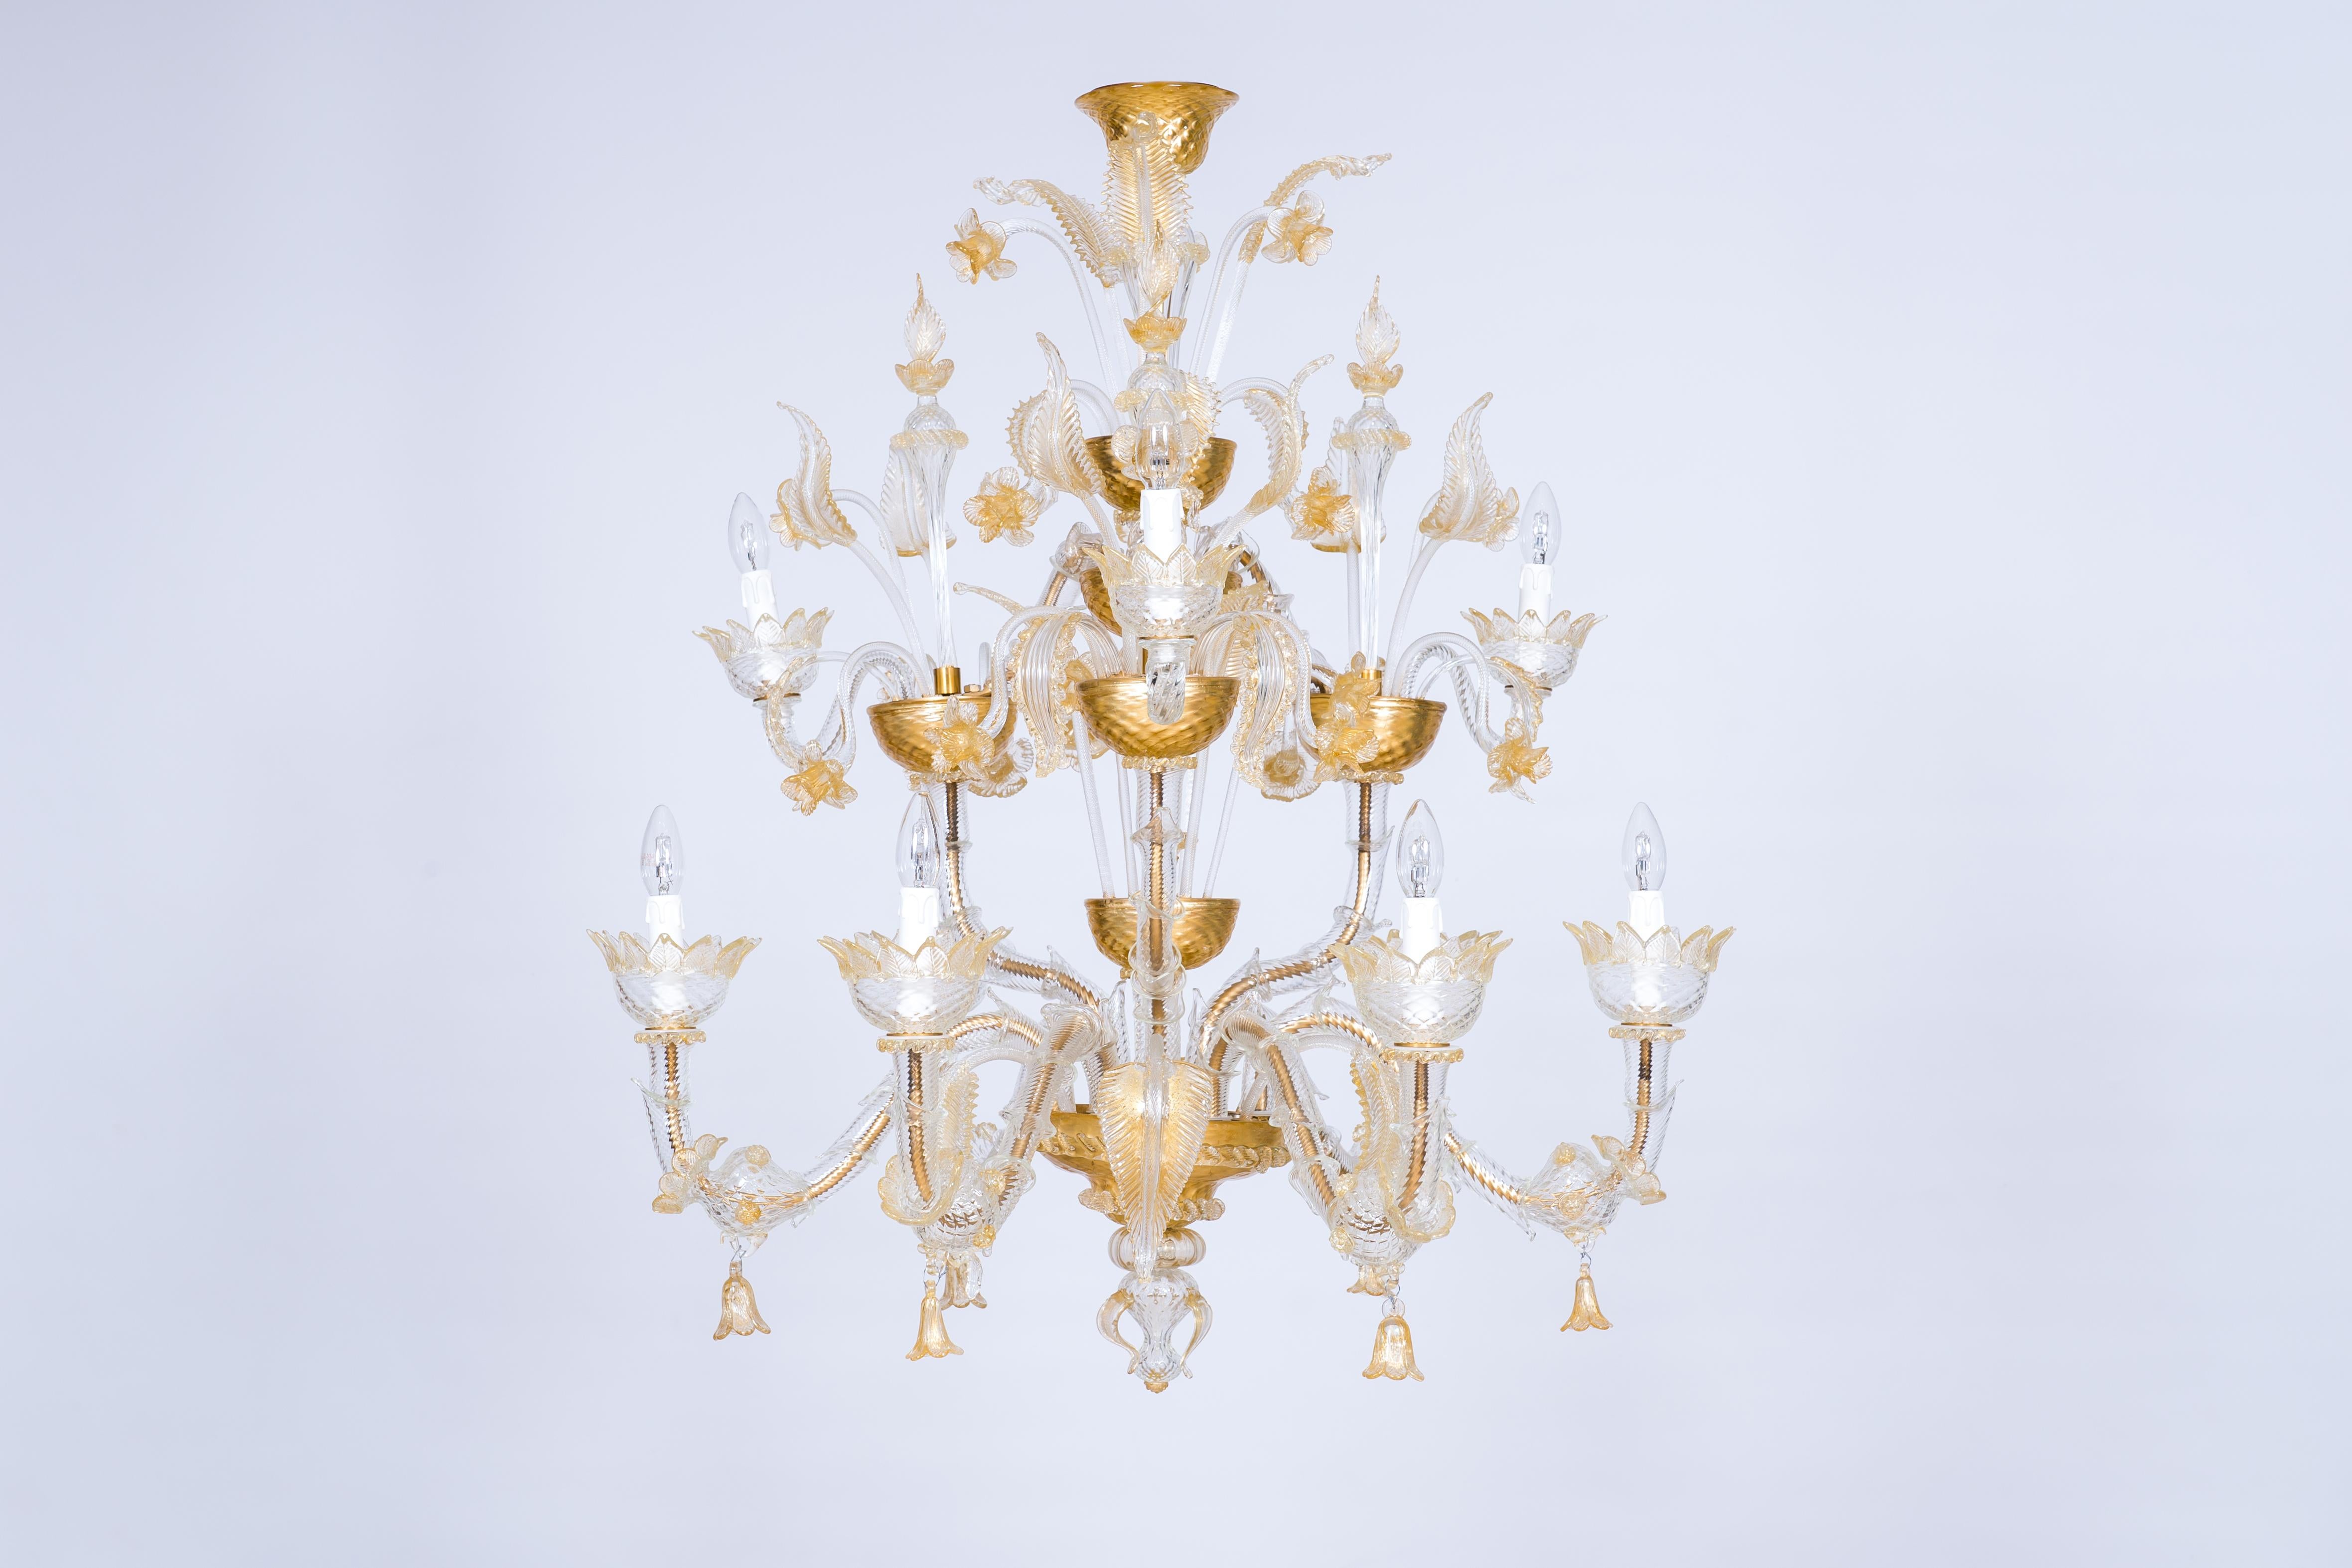 Astonished Italian Venetian Ca' Rezzonico chandelier in blown Murano glass, gold, 1950s.
Elegant Italian Ca' Rezzonico chandelier in blown Murano glass transparent and gold, composed by arms lower and higher, leaves, flowers in the upper gardens